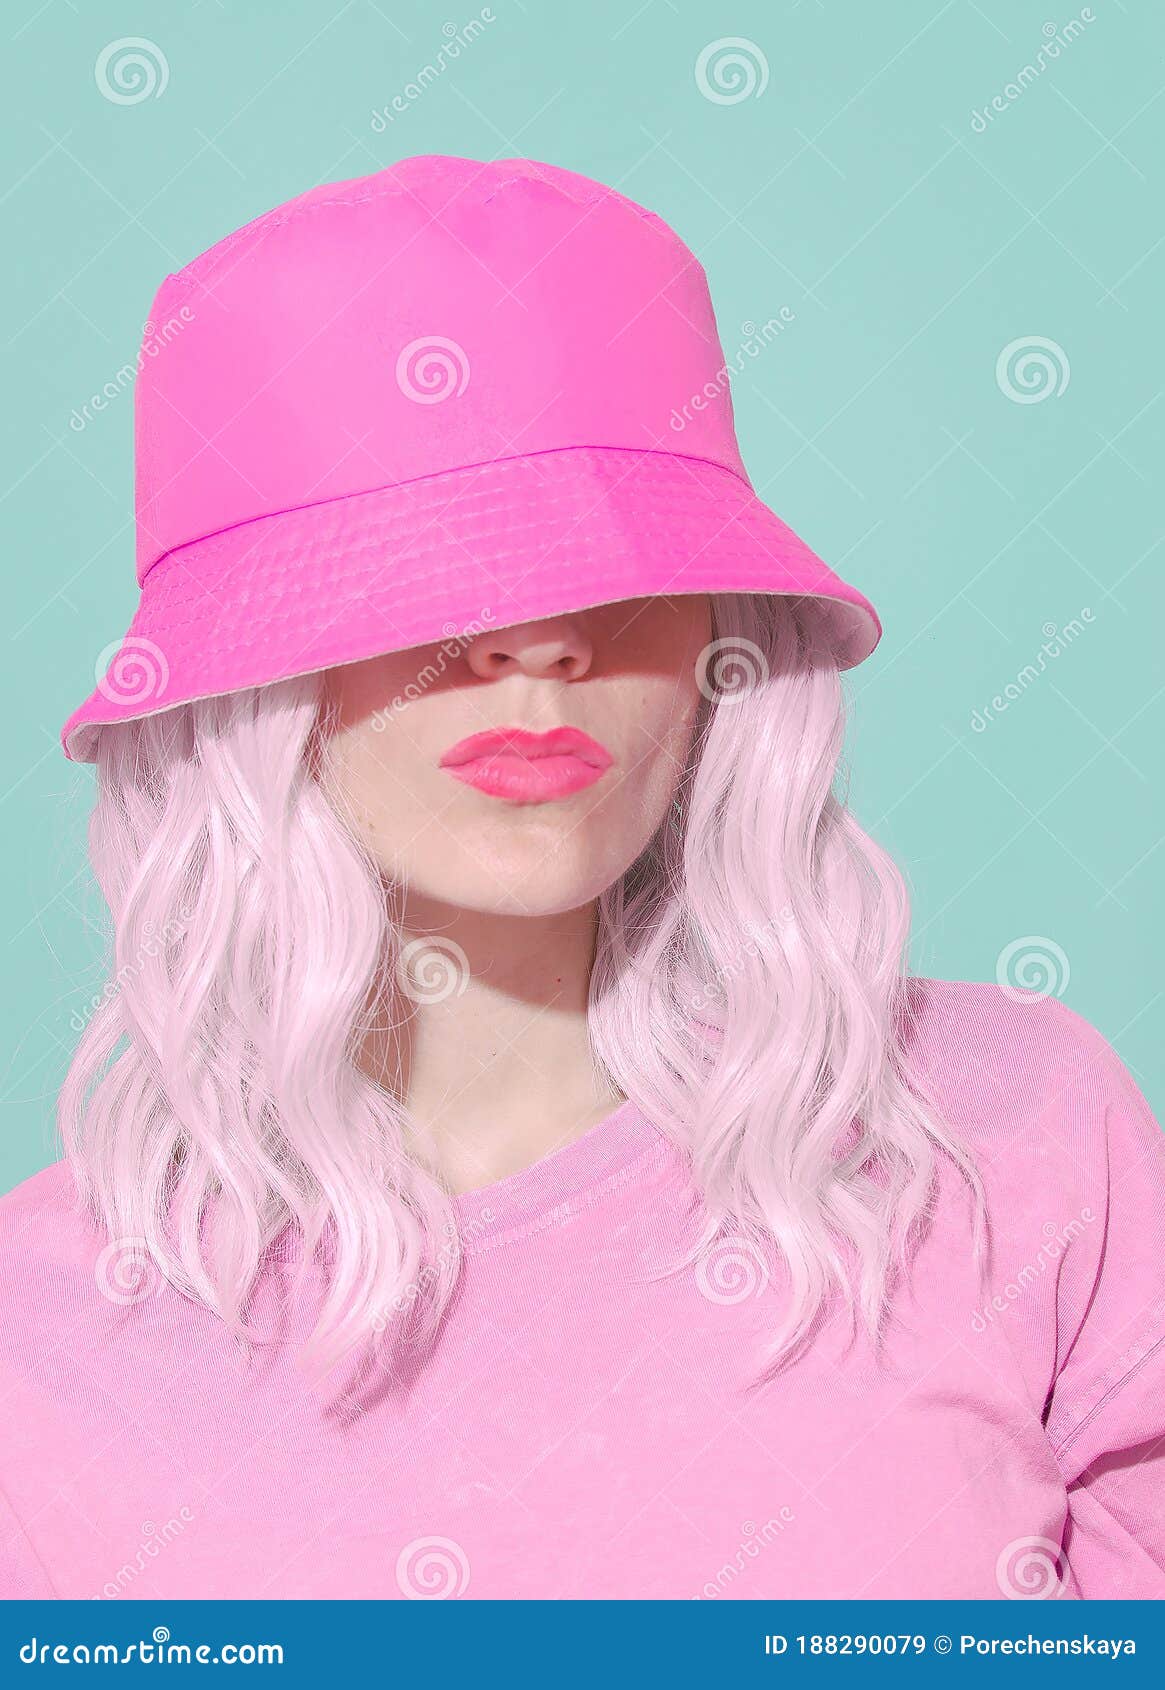 Fashion Aesthetic Girl in Trendy Summer Accessories. Pink Bucket